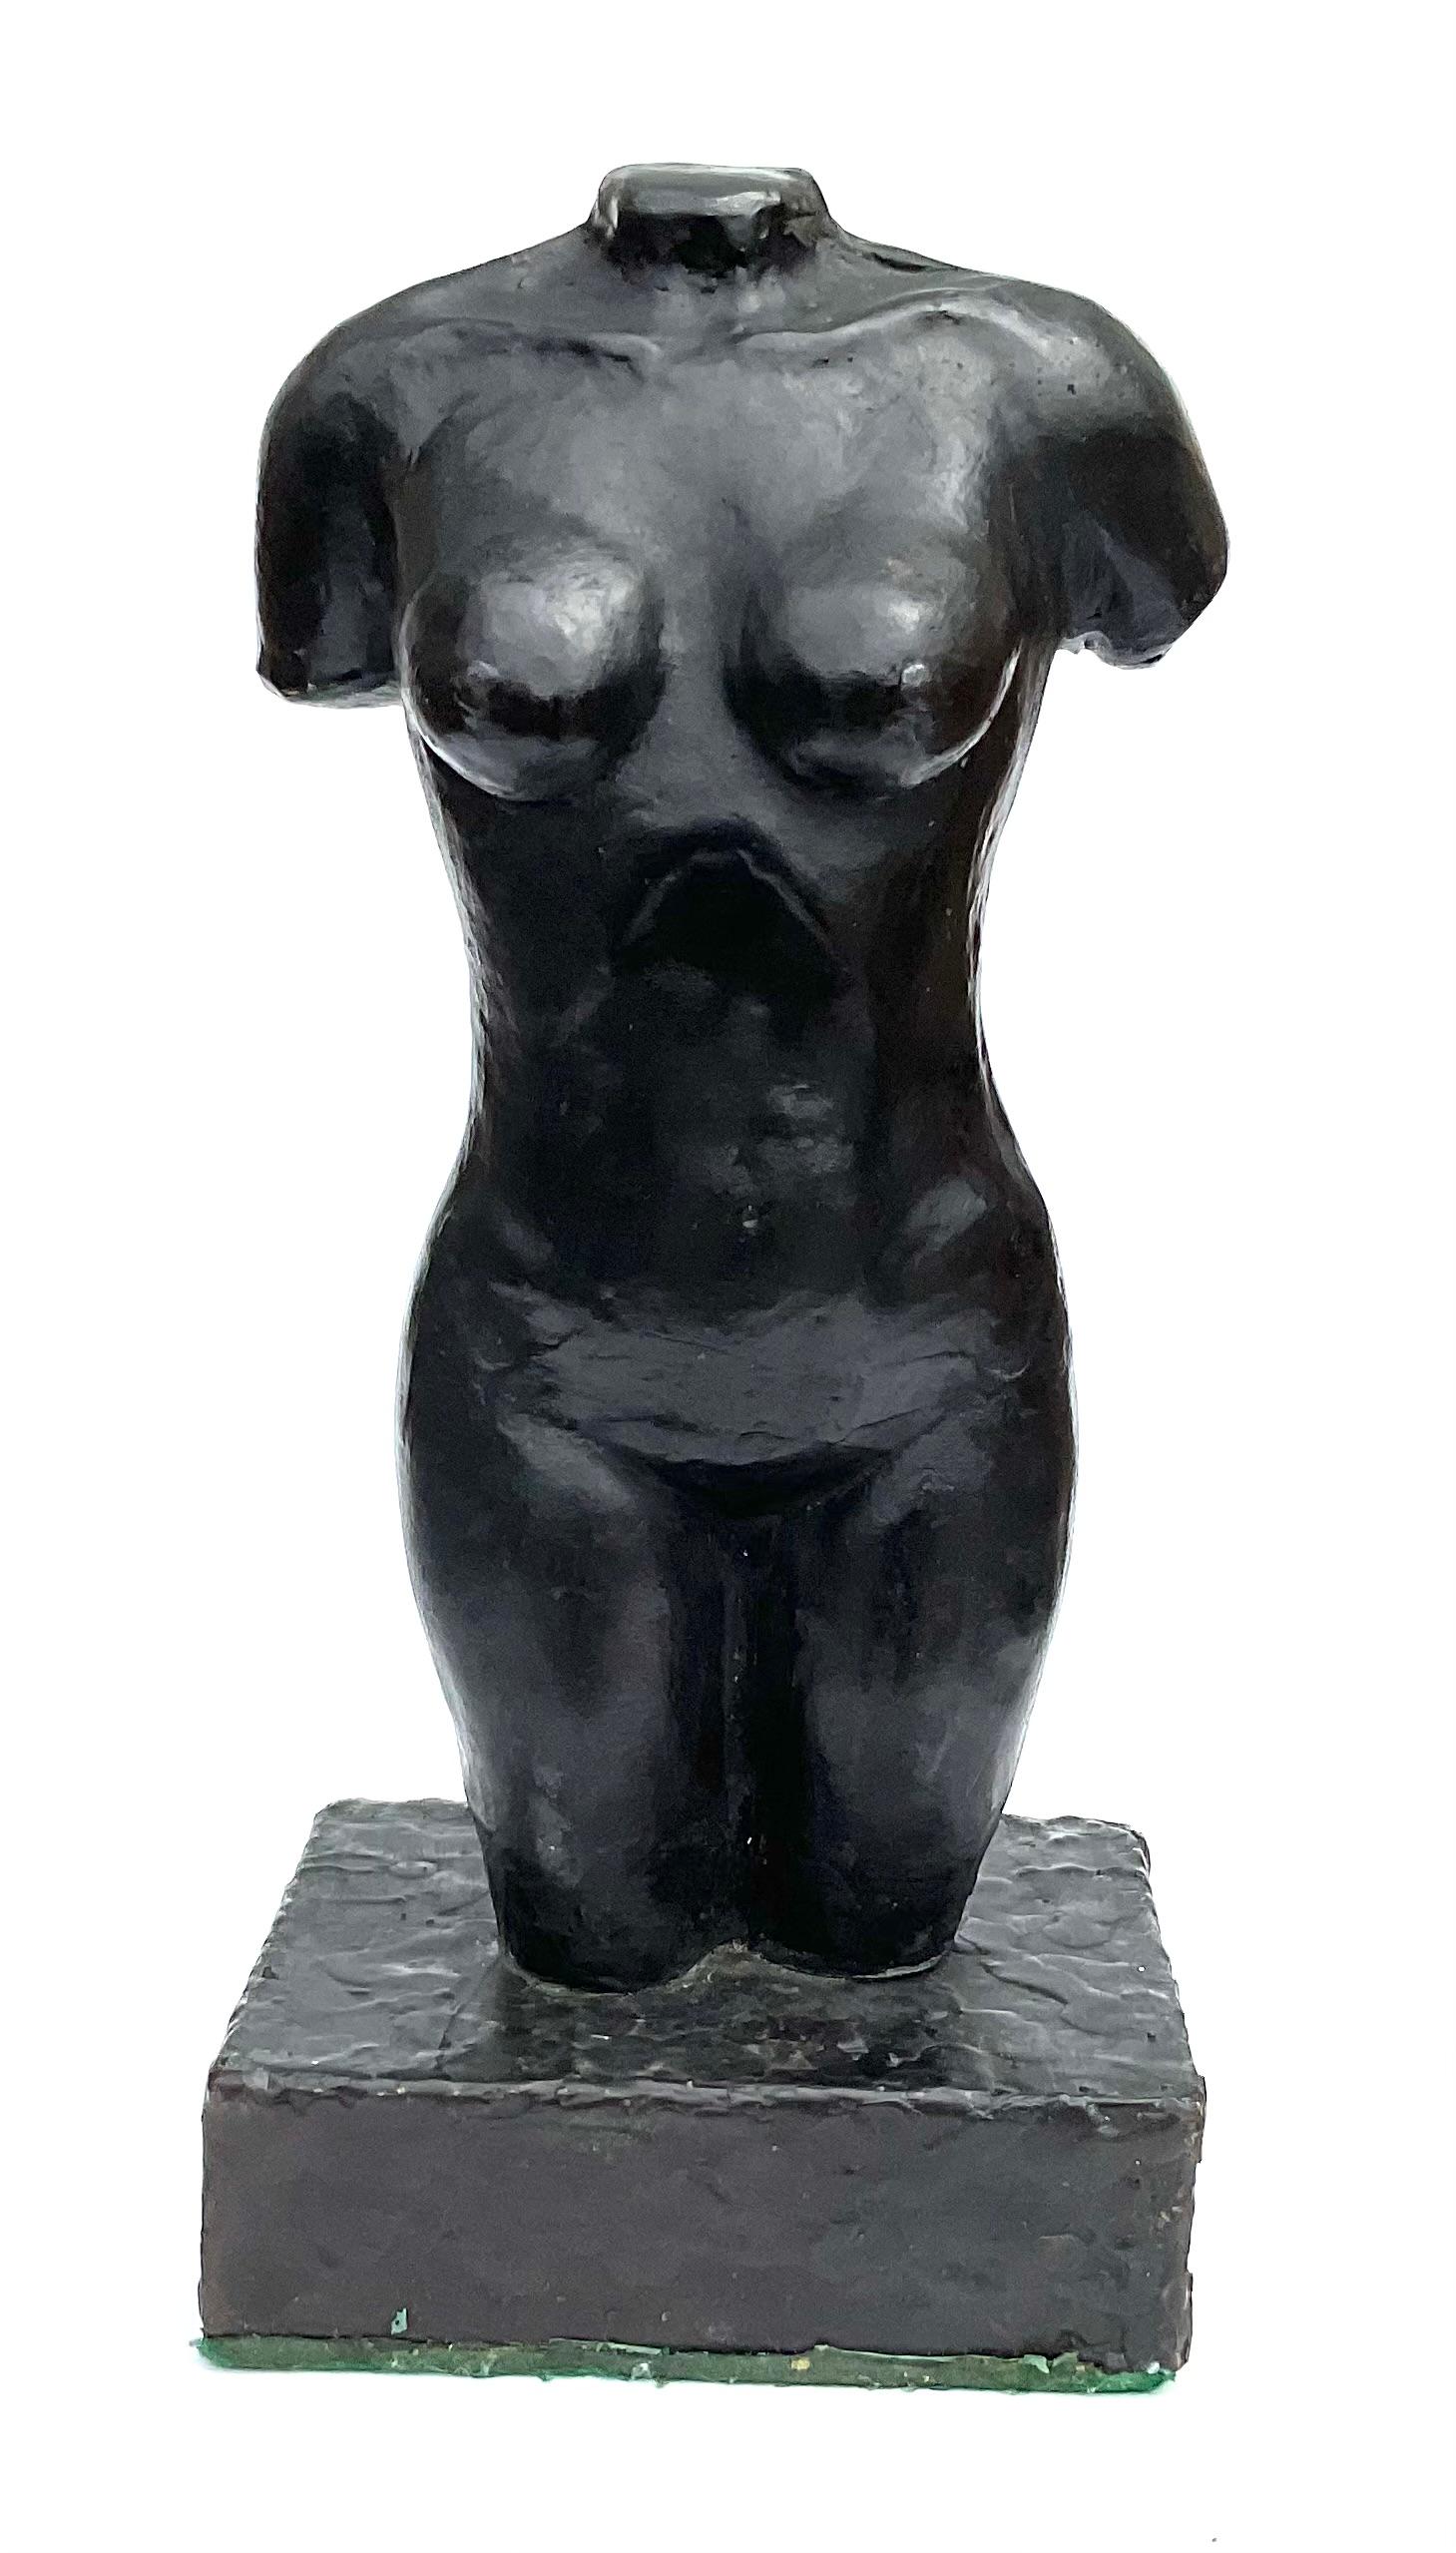 Frederick Hart Bronze Nude Female Bust Sculpture Artist Proof 1 of 1. Known for his amazing Lucite sculptures this artist did few bronzes. His bronze sculptures are highly sought after like his lucite sculptures, but far fewer bronze sculptures were